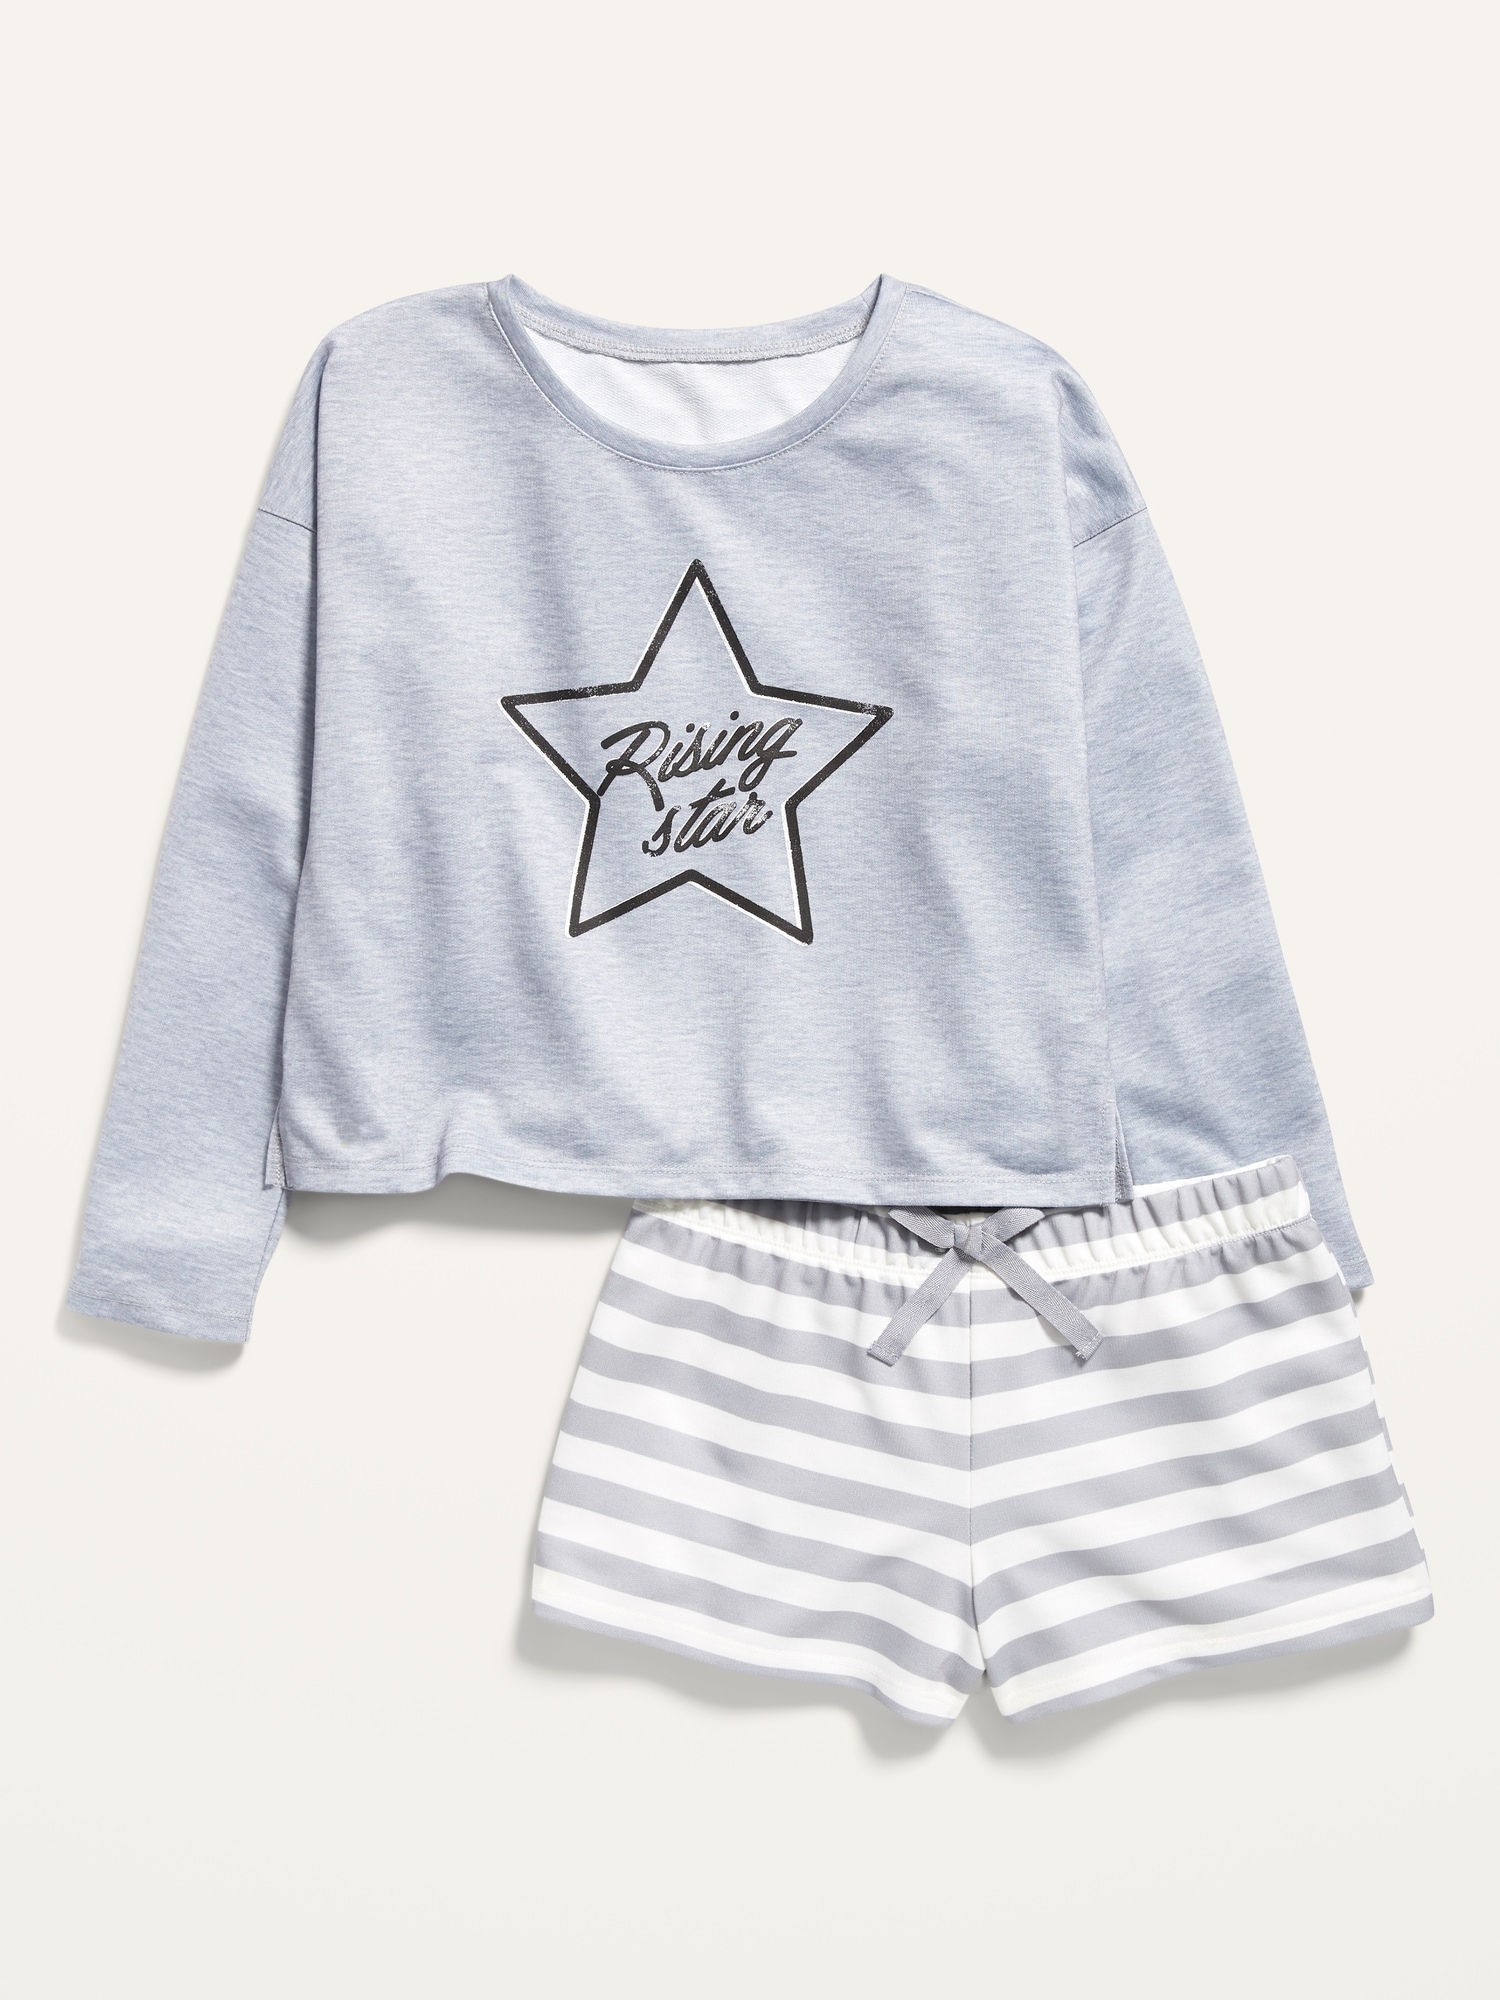 French Terry Pajama Top & Pajama Shorts Set for Girls | Old Navy